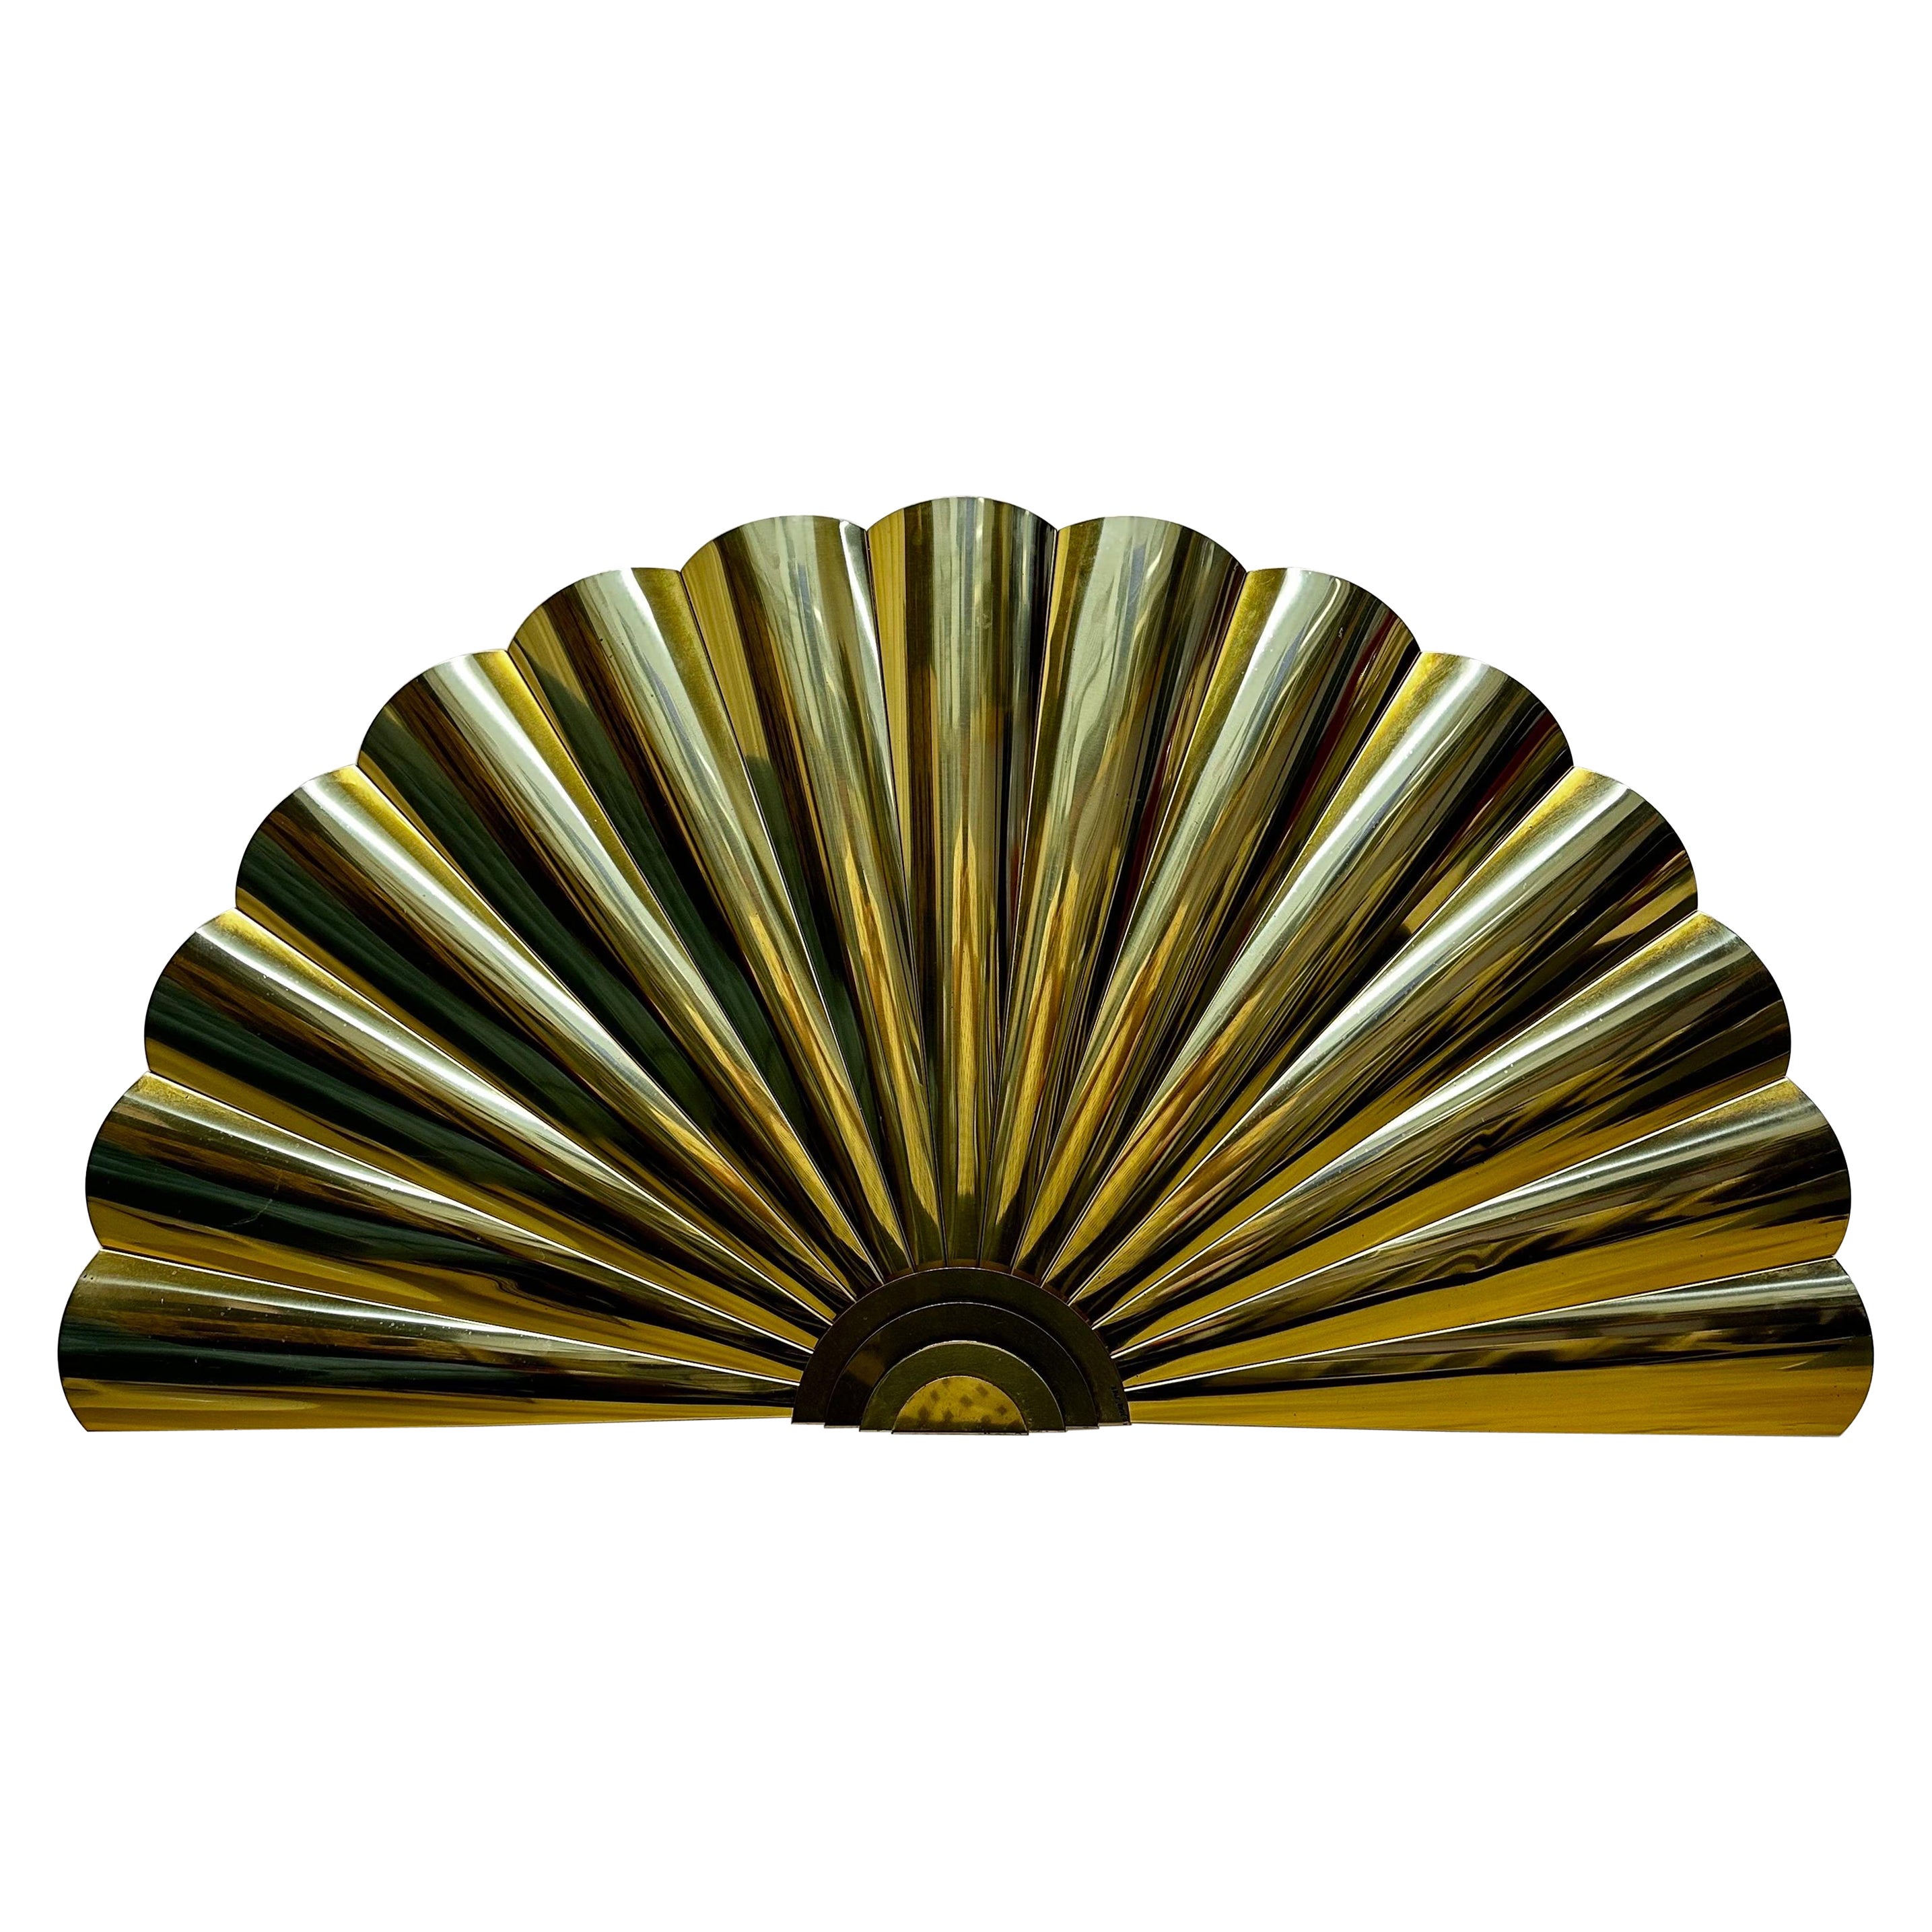 Curtis Jere Artisan House Large Brass Fan Wall Sculpture, 1989 For Sale